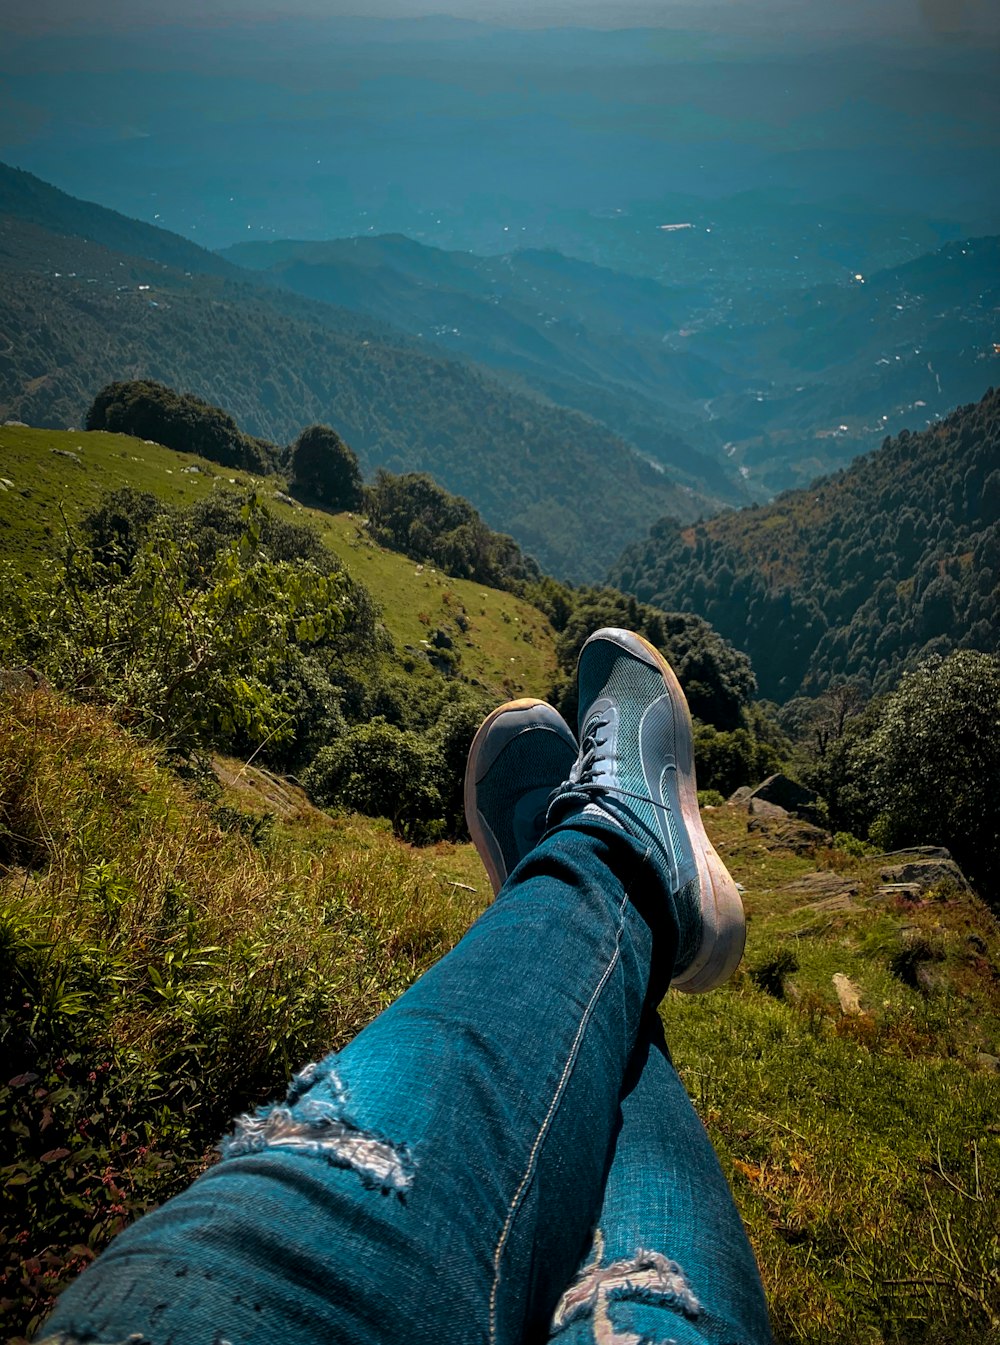 person in blue denim jeans and black and white sneakers sitting on rock mountain during daytime